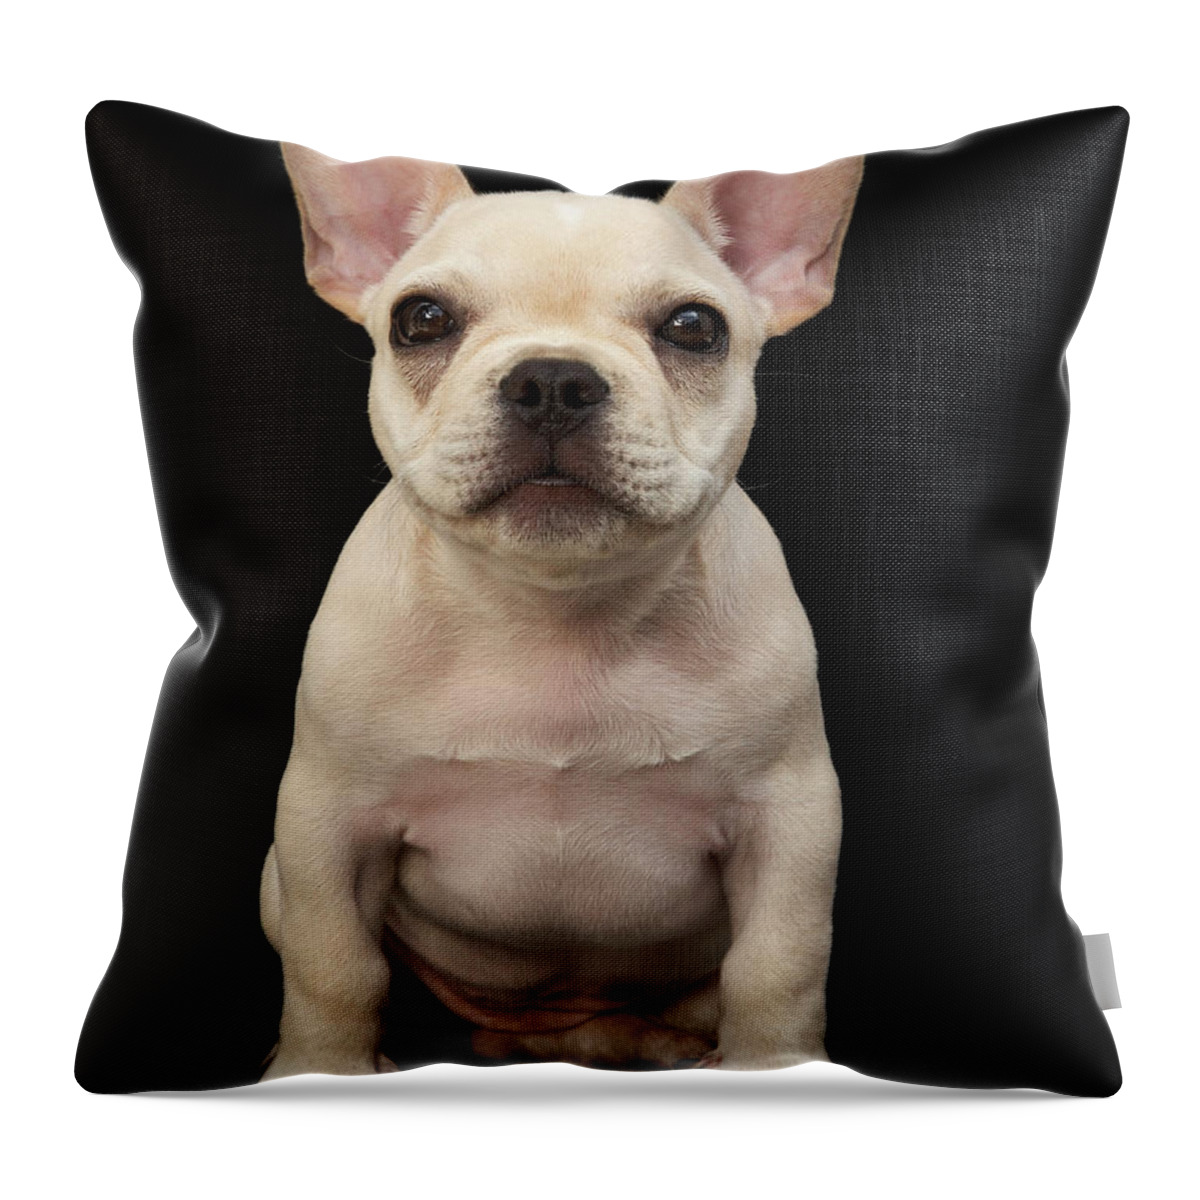 Pets Throw Pillow featuring the photograph Cream Colored French Bulldog Puppy by M Photo